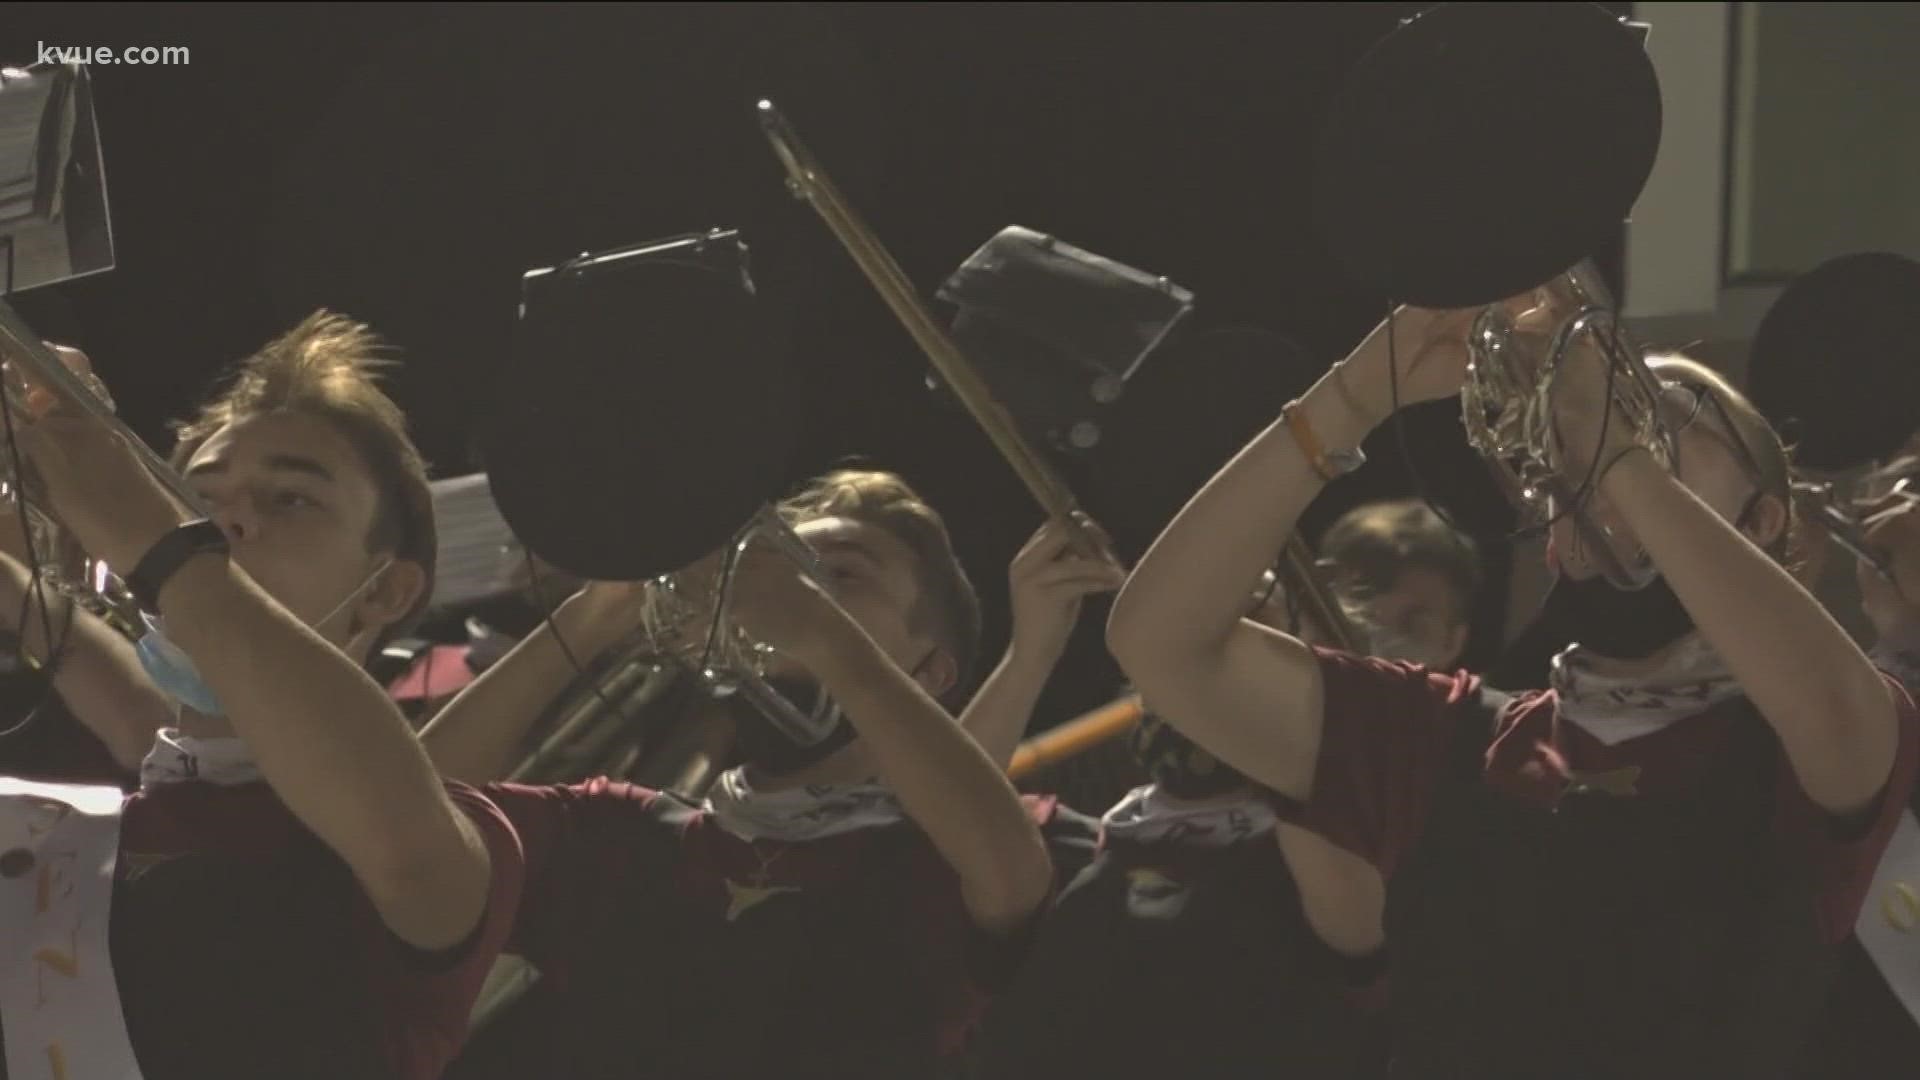 This week's band of the week goes to Rouse High School!